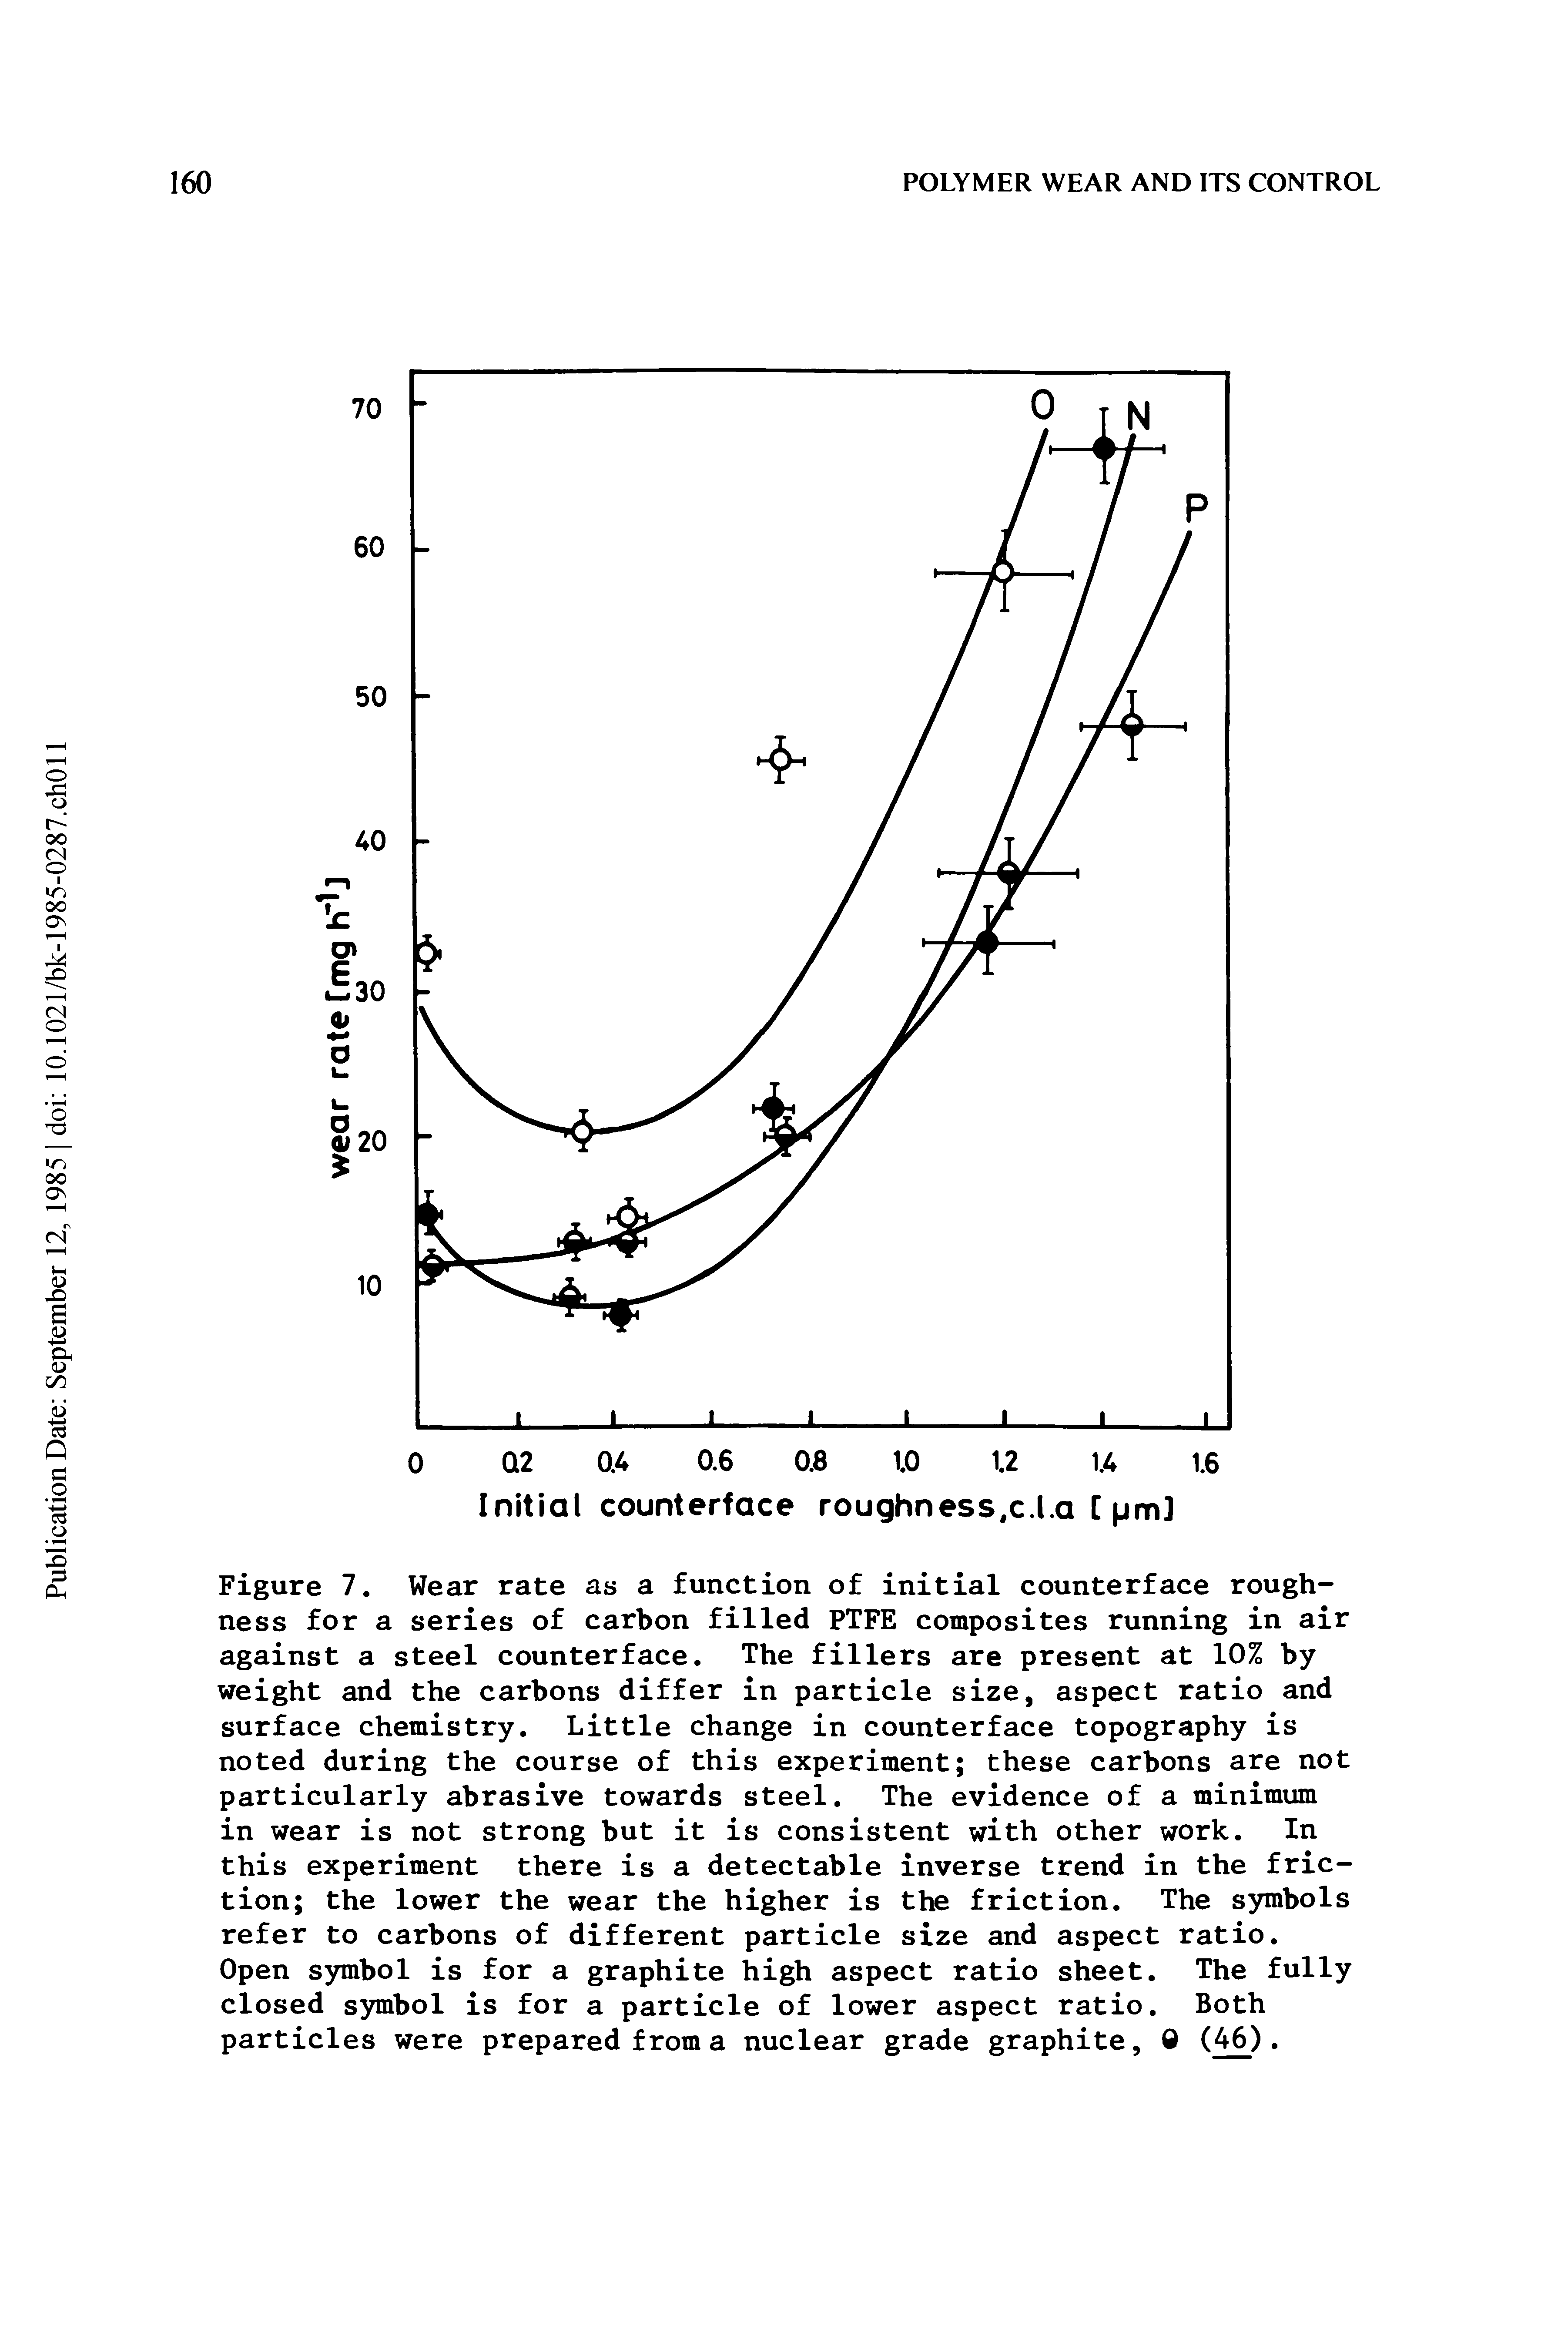 Figure 7. Wear rate as a function of initial counterface roughness for a series of carbon filled PTFE composites running in air against a steel counterface. The fillers are present at 10% by weight and the carbons differ in particle size, aspect ratio and surface chemistry. Little change in counterface topography is noted during the course of this experiment these carbons are not particularly abrasive towards steel. The evidence of a minimum in wear is not strong but it is consistent with other work. In this experiment there is a detectable inverse trend in the friction the lower the wear the higher is the friction. The symbols refer to carbons of different particle size and aspect ratio.